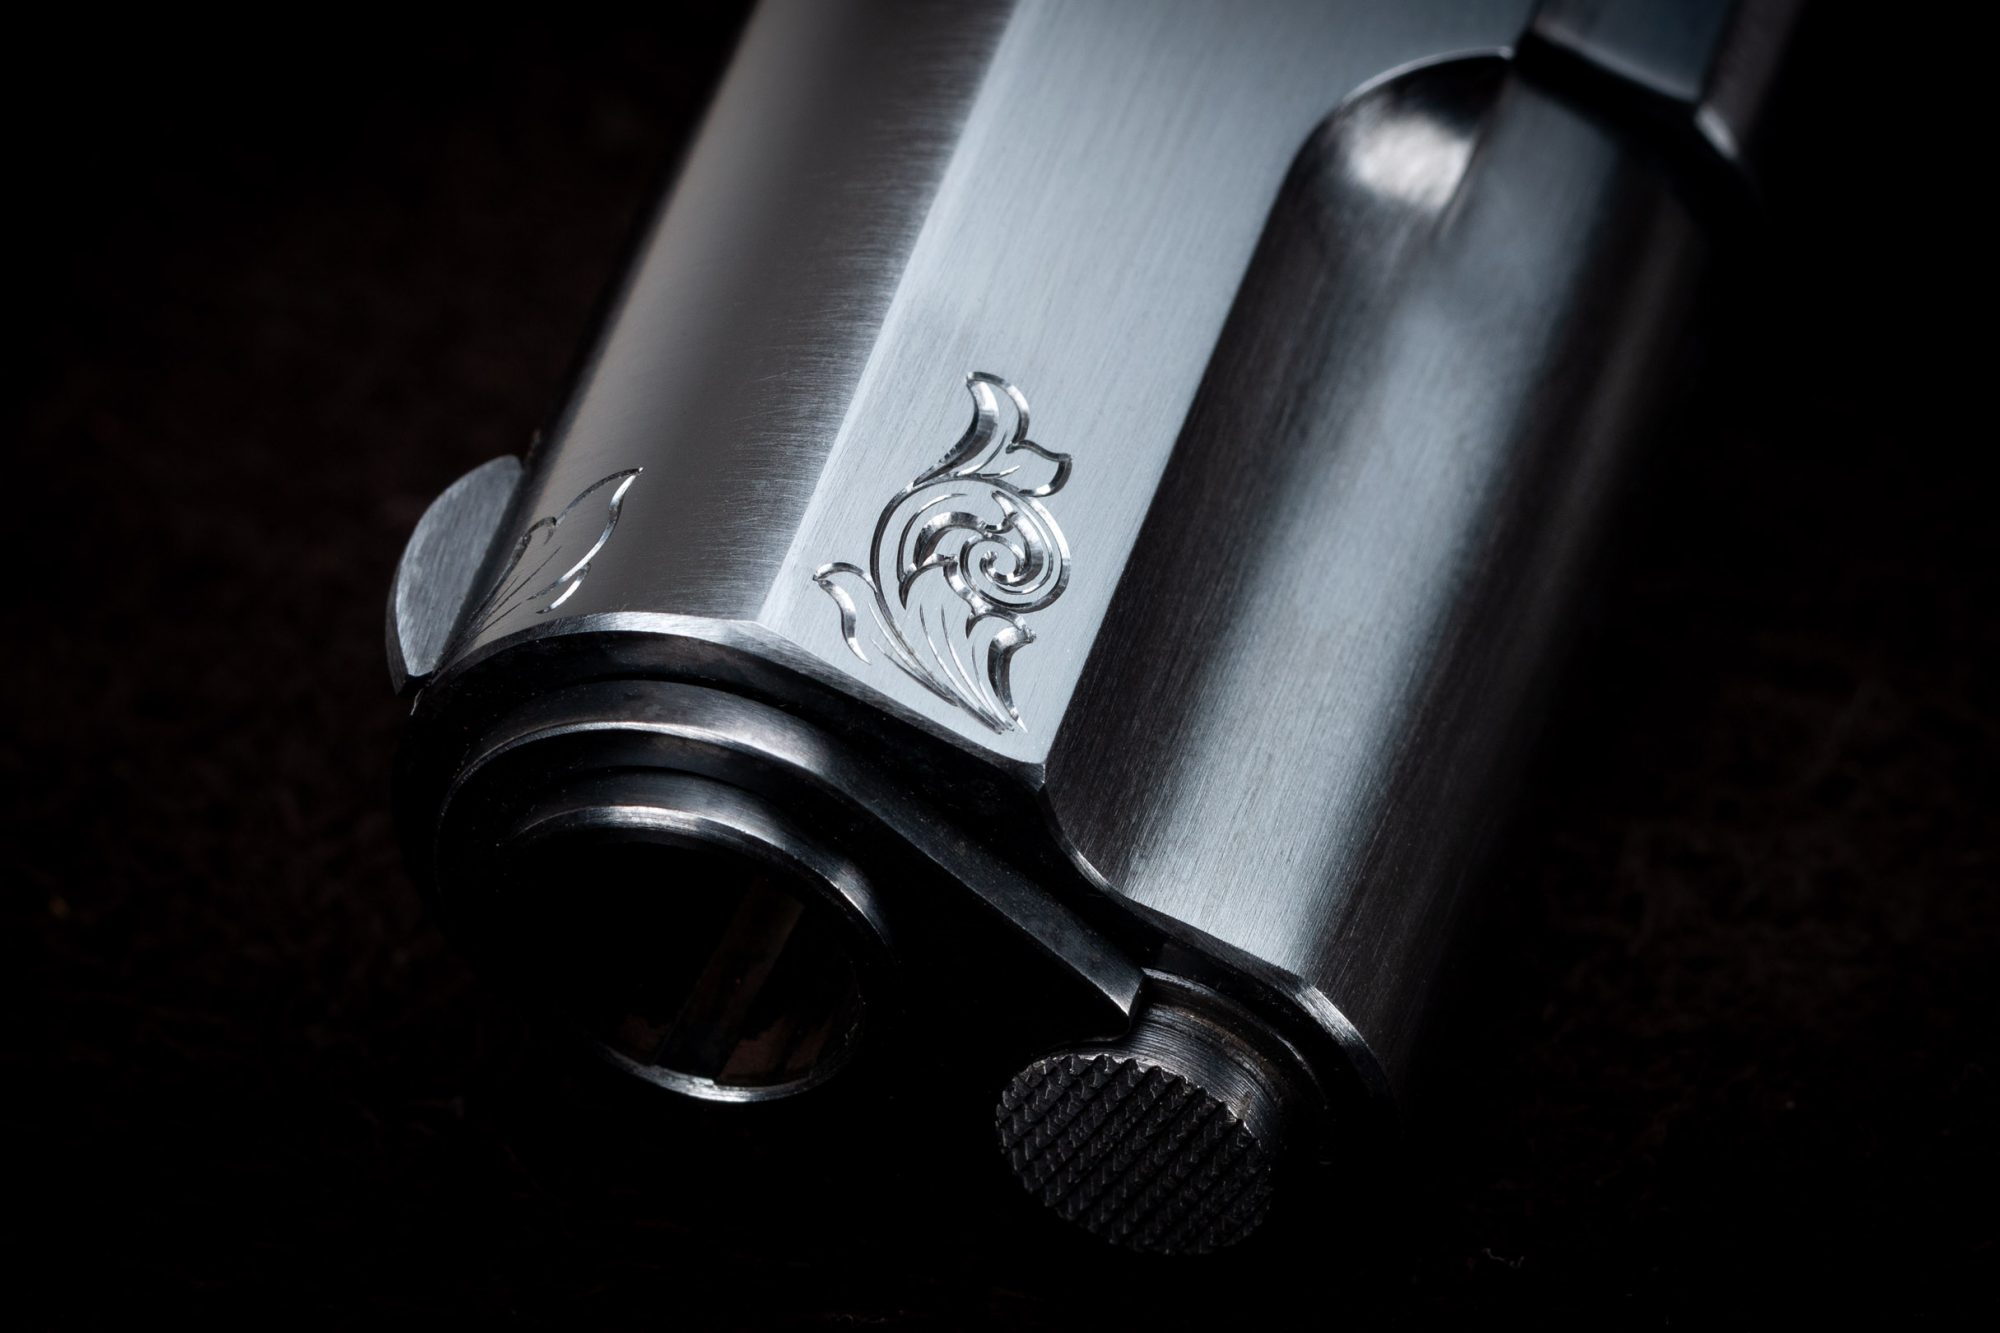 Photo of a Turnbull-made Model 1911 replica pistol, featuring hand engraving and period-correct charcoal bluing